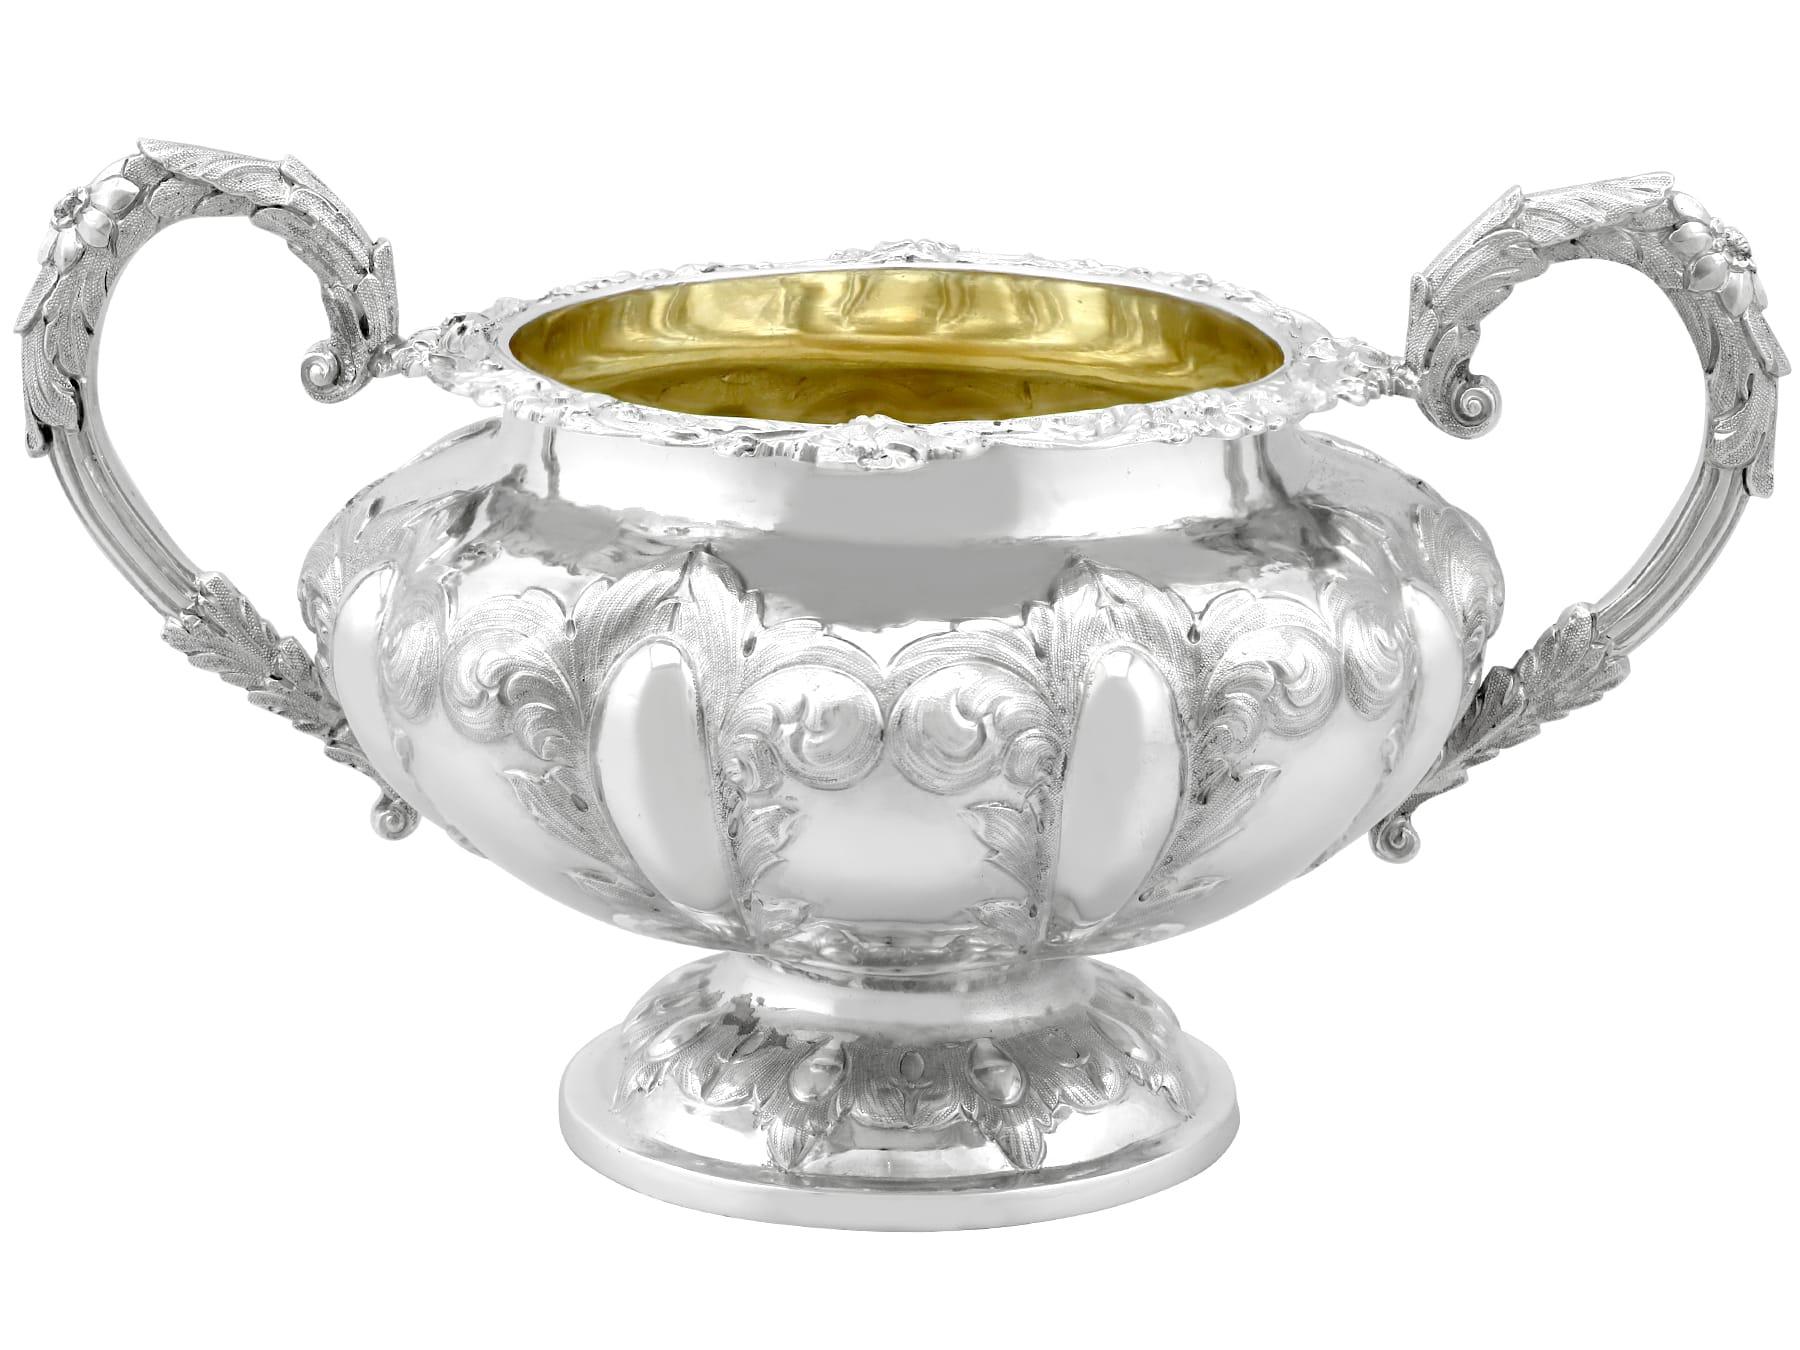 An exceptional, fine and impressive antique Victorian English sterling silver sugar bowl; an addition to our dining silverware collection

This exceptional, fine and impressive antique Victorian silver sugar bowl, in sterling standard, has a